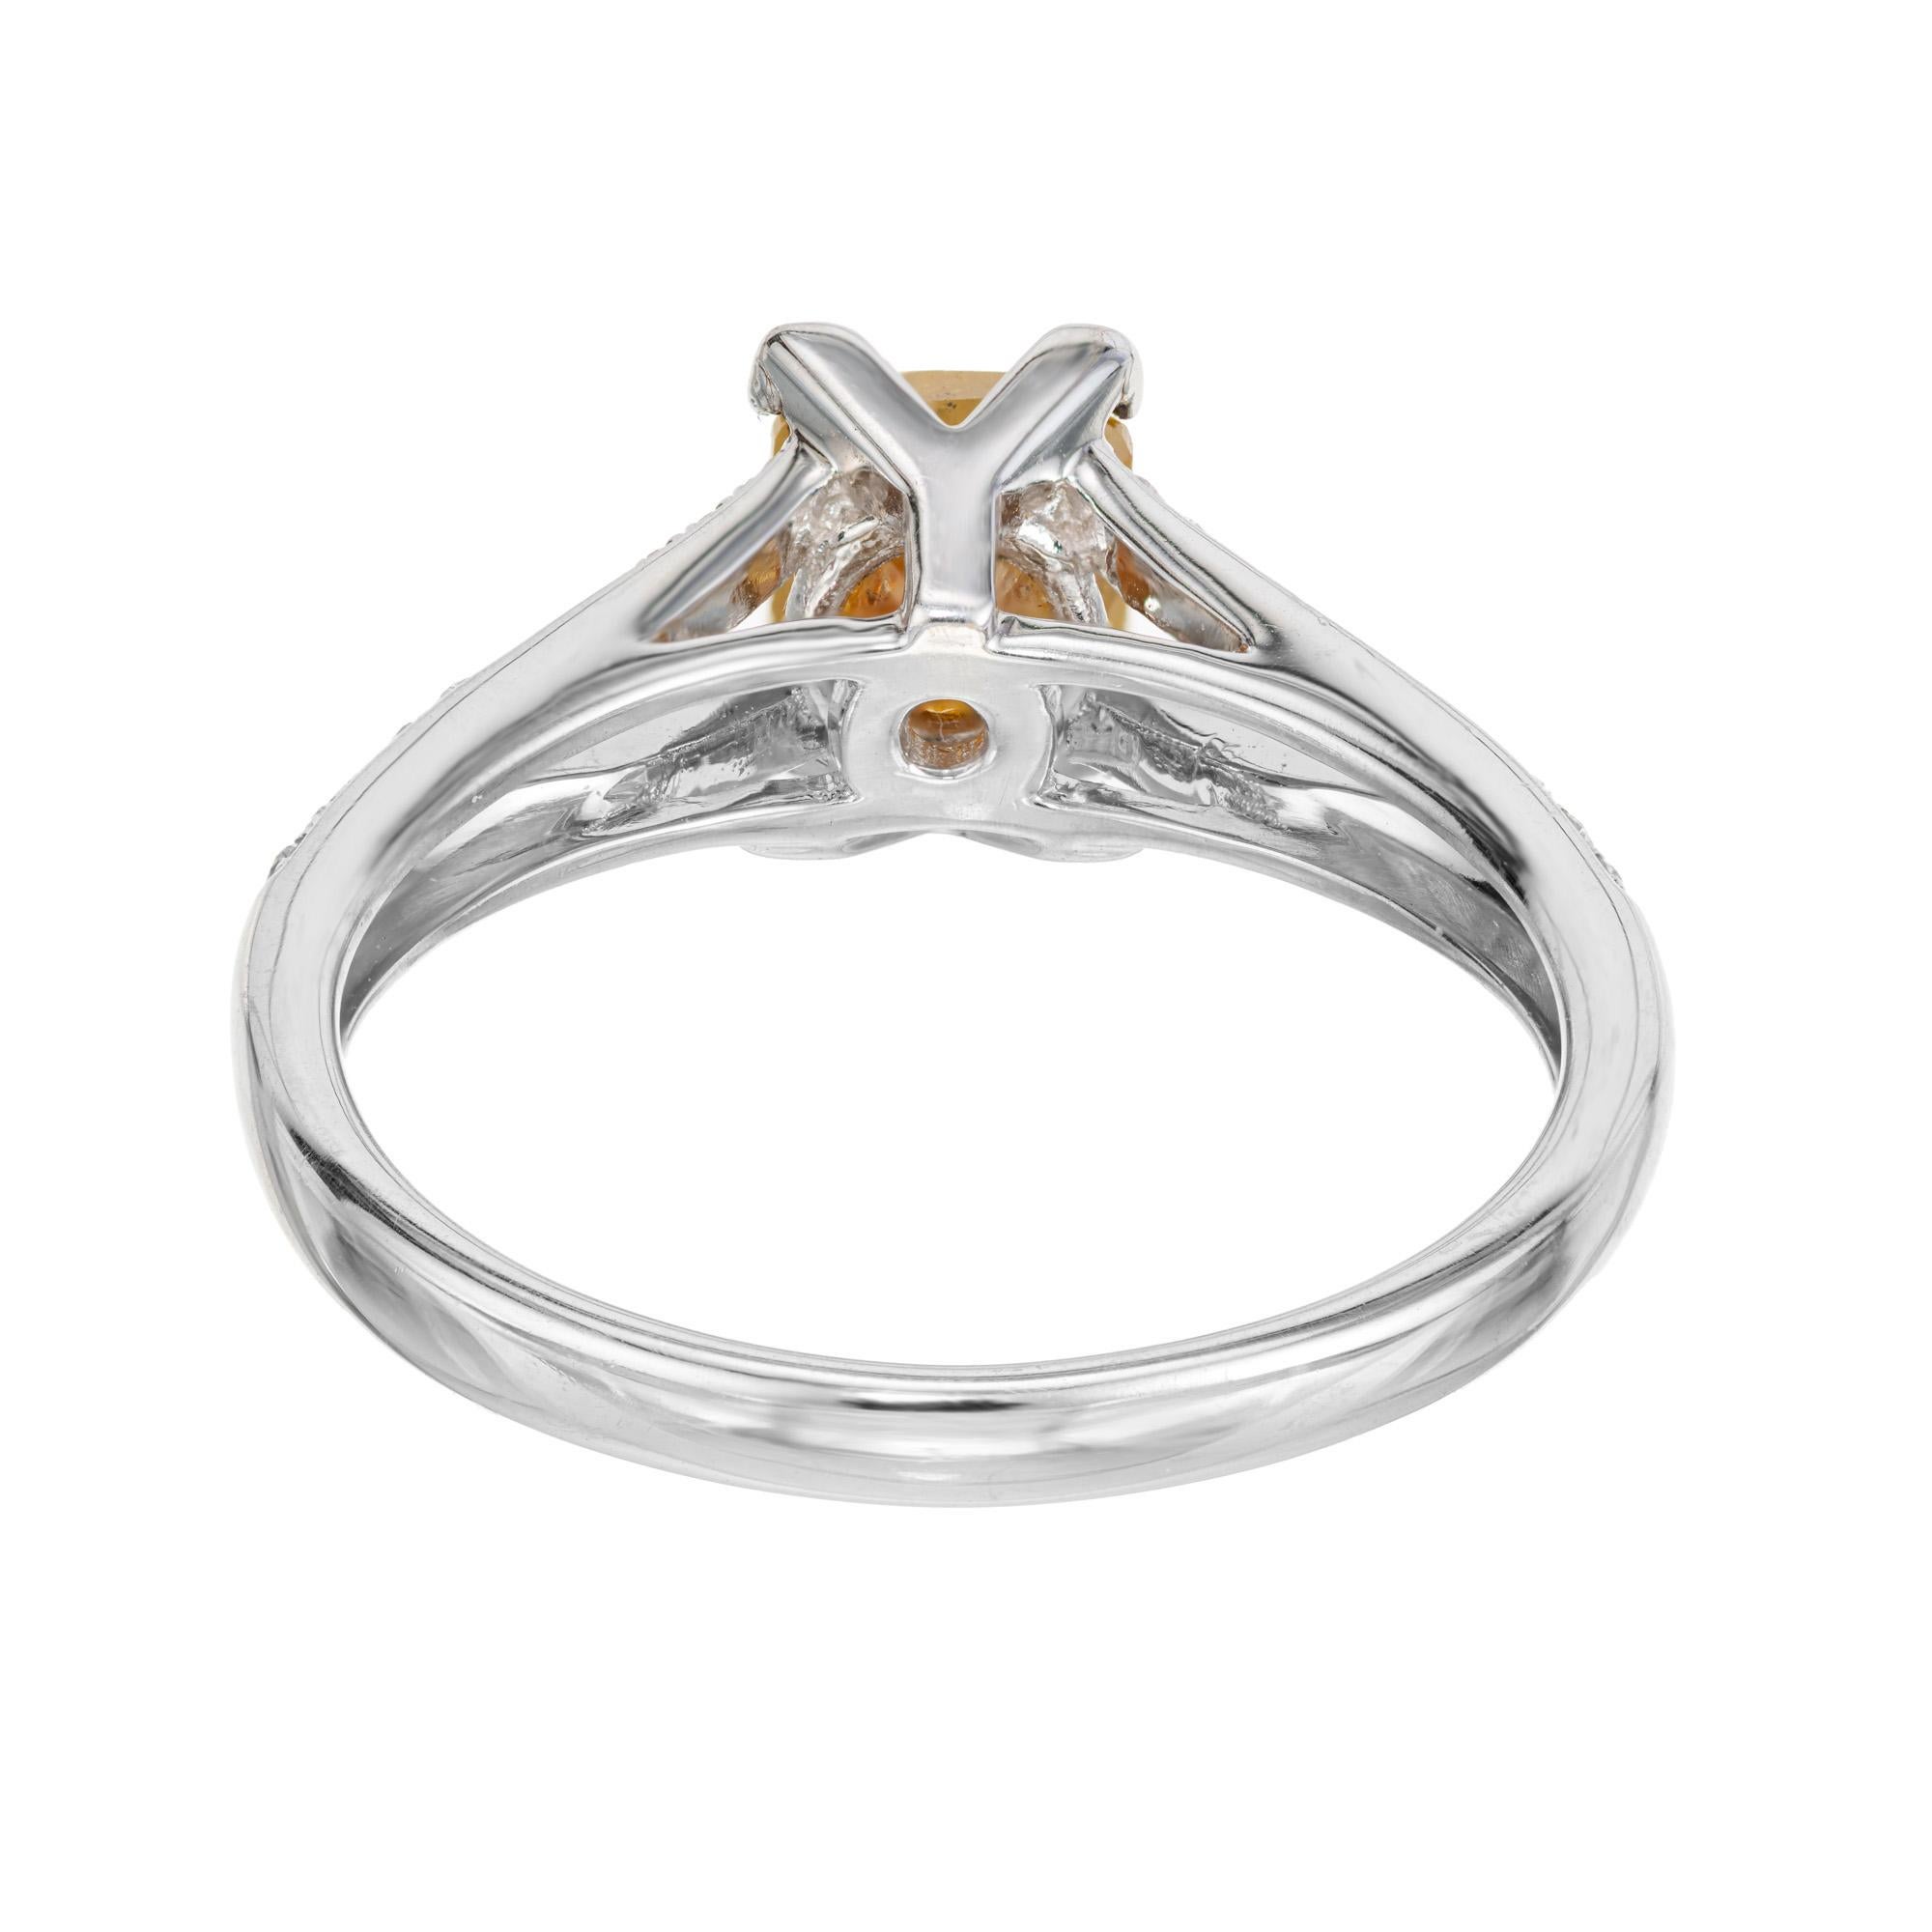 GIA Certified 1.17 Carat Yellow Square Diamond White Gold Engagement Ring For Sale 3